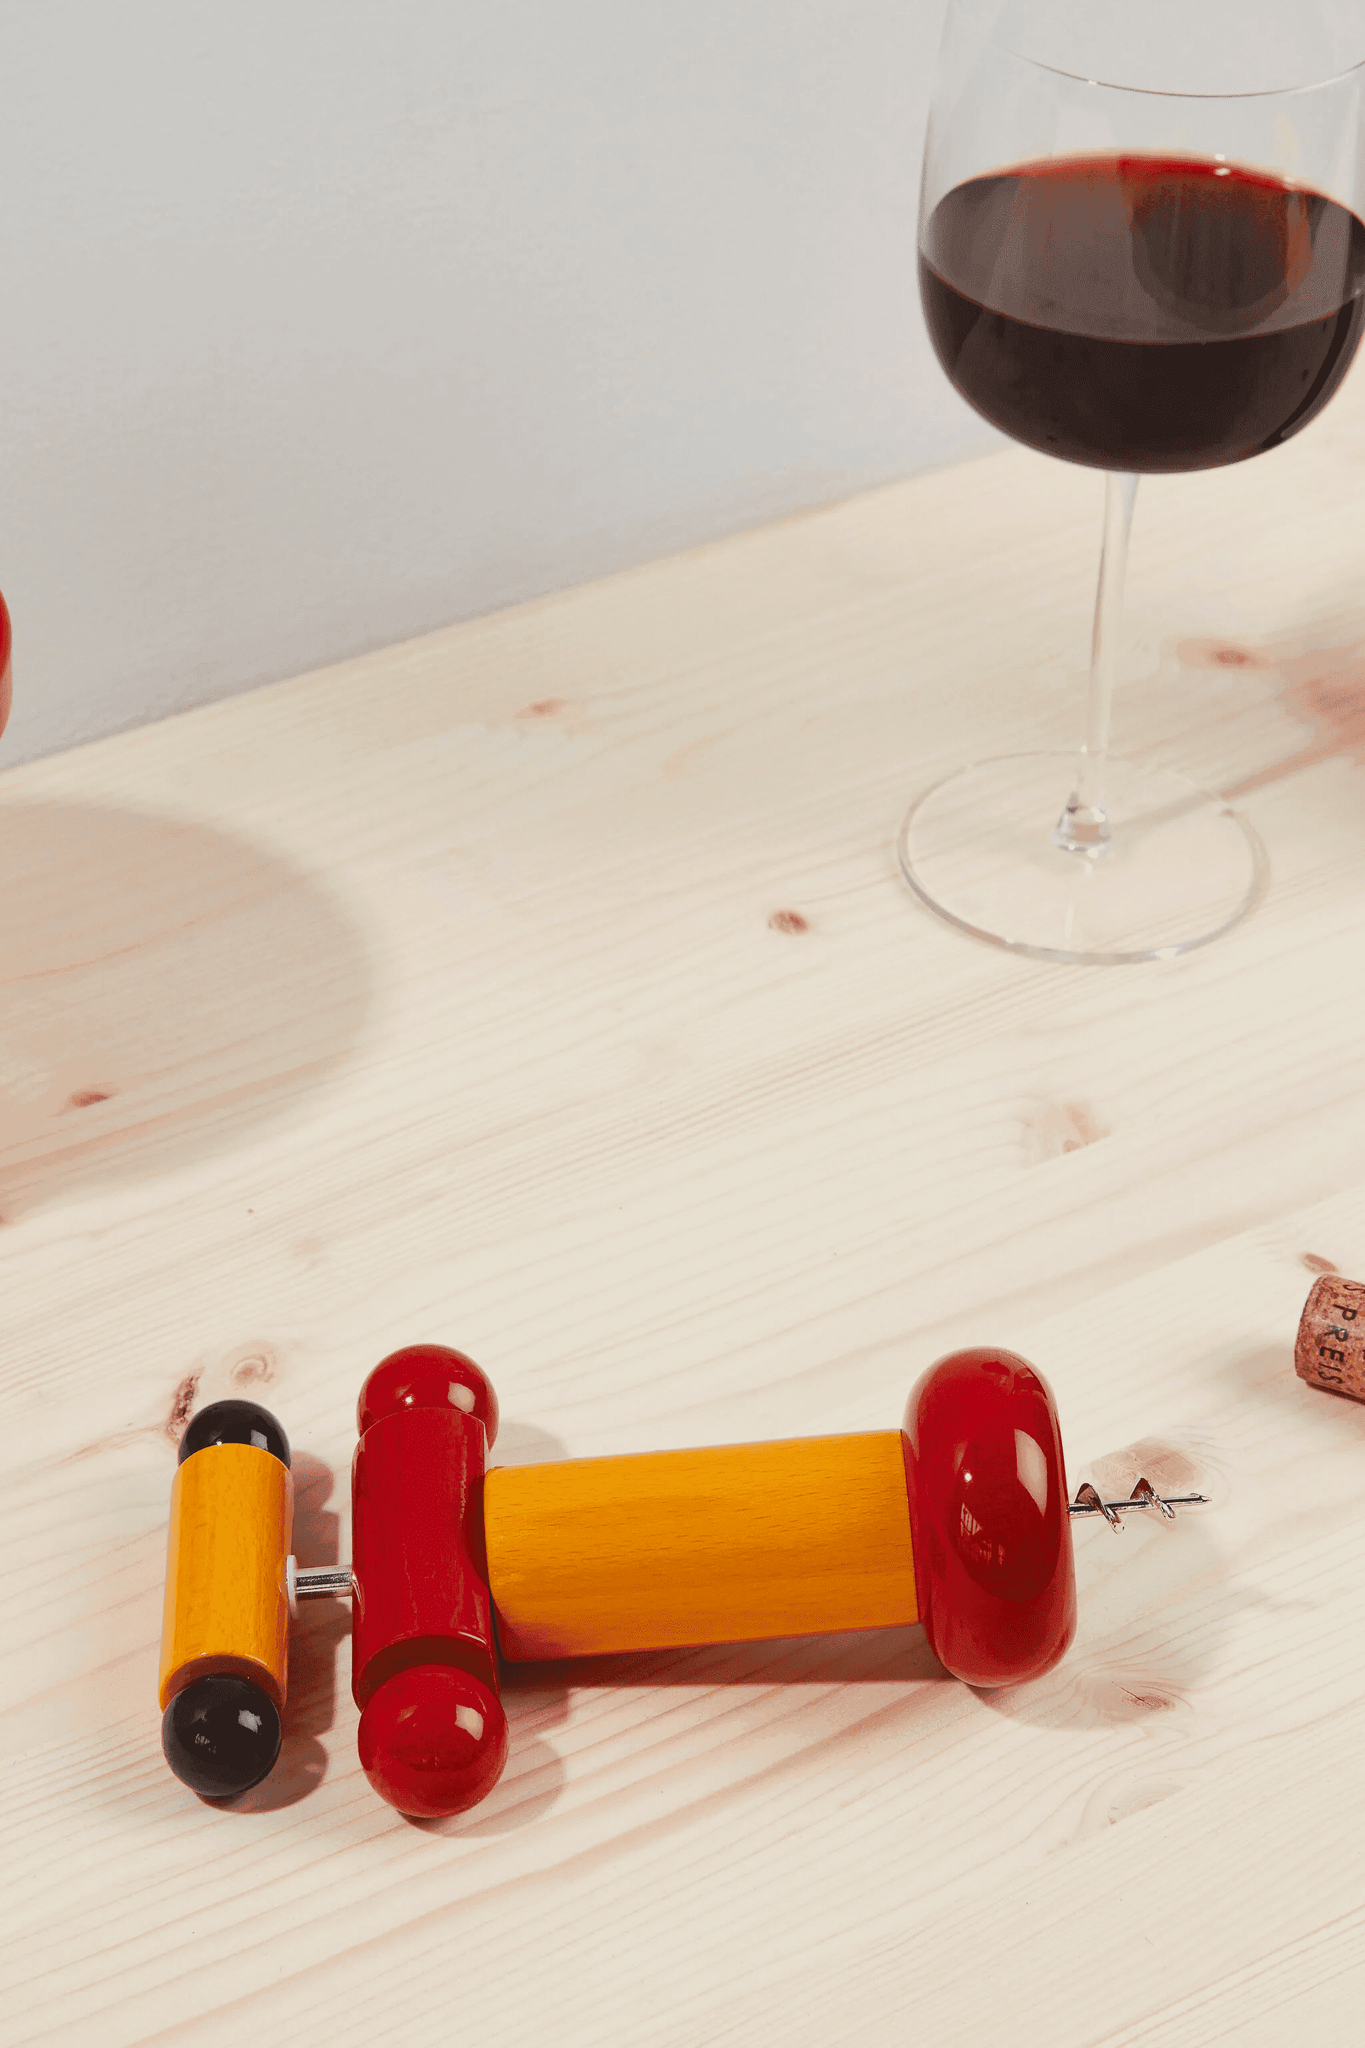 Corkscrew, Yellow Alessi Ettore Sottsass, shown on table